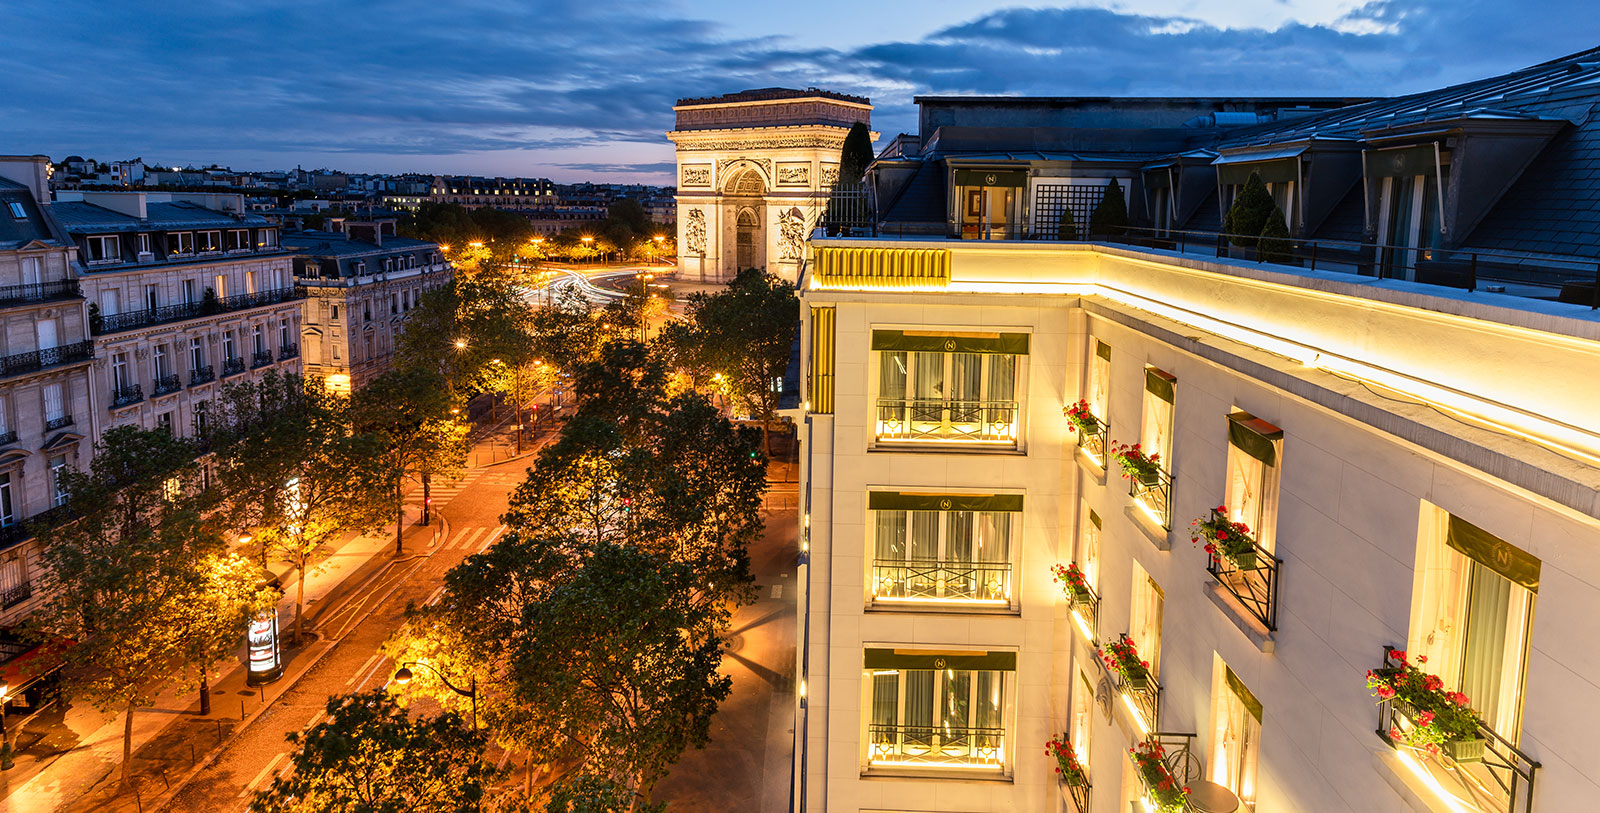 Stroll down the nearby Champs Elysées and admire the Parisian skyline from your hotel window.